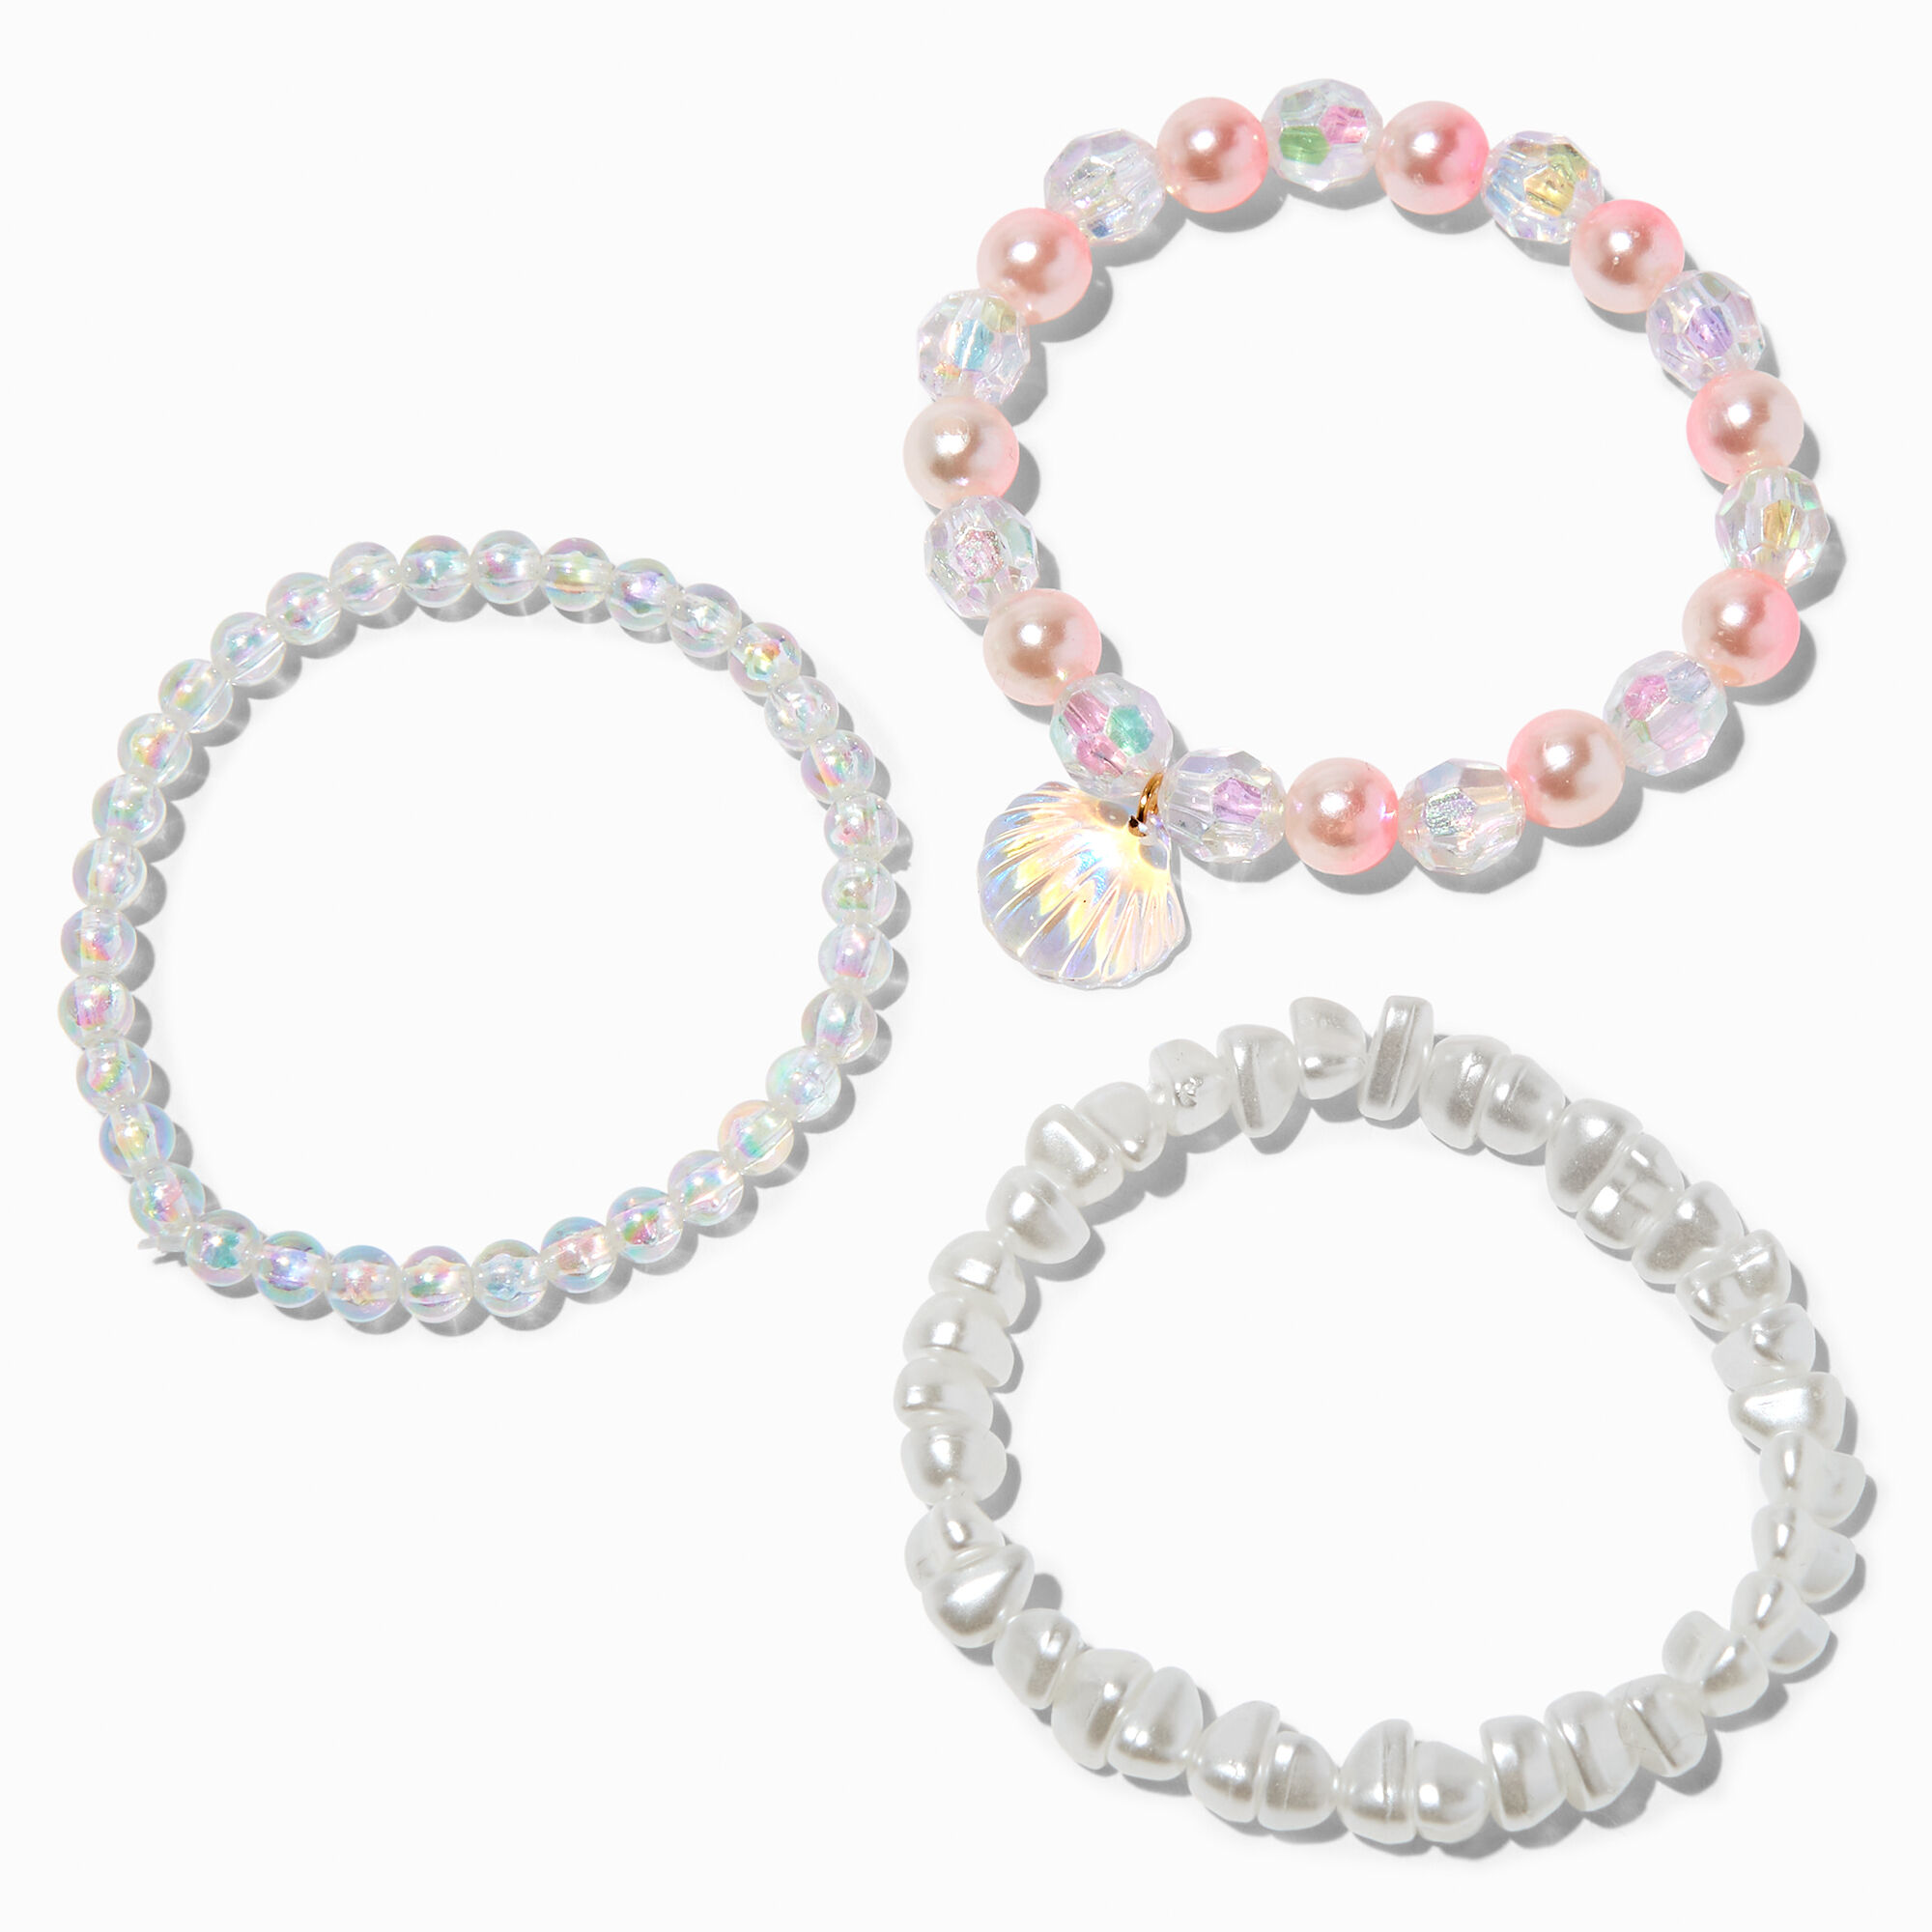 View Claires Iridescent Seashell Beaded Stretch Bracelets 3 Pack Pink information